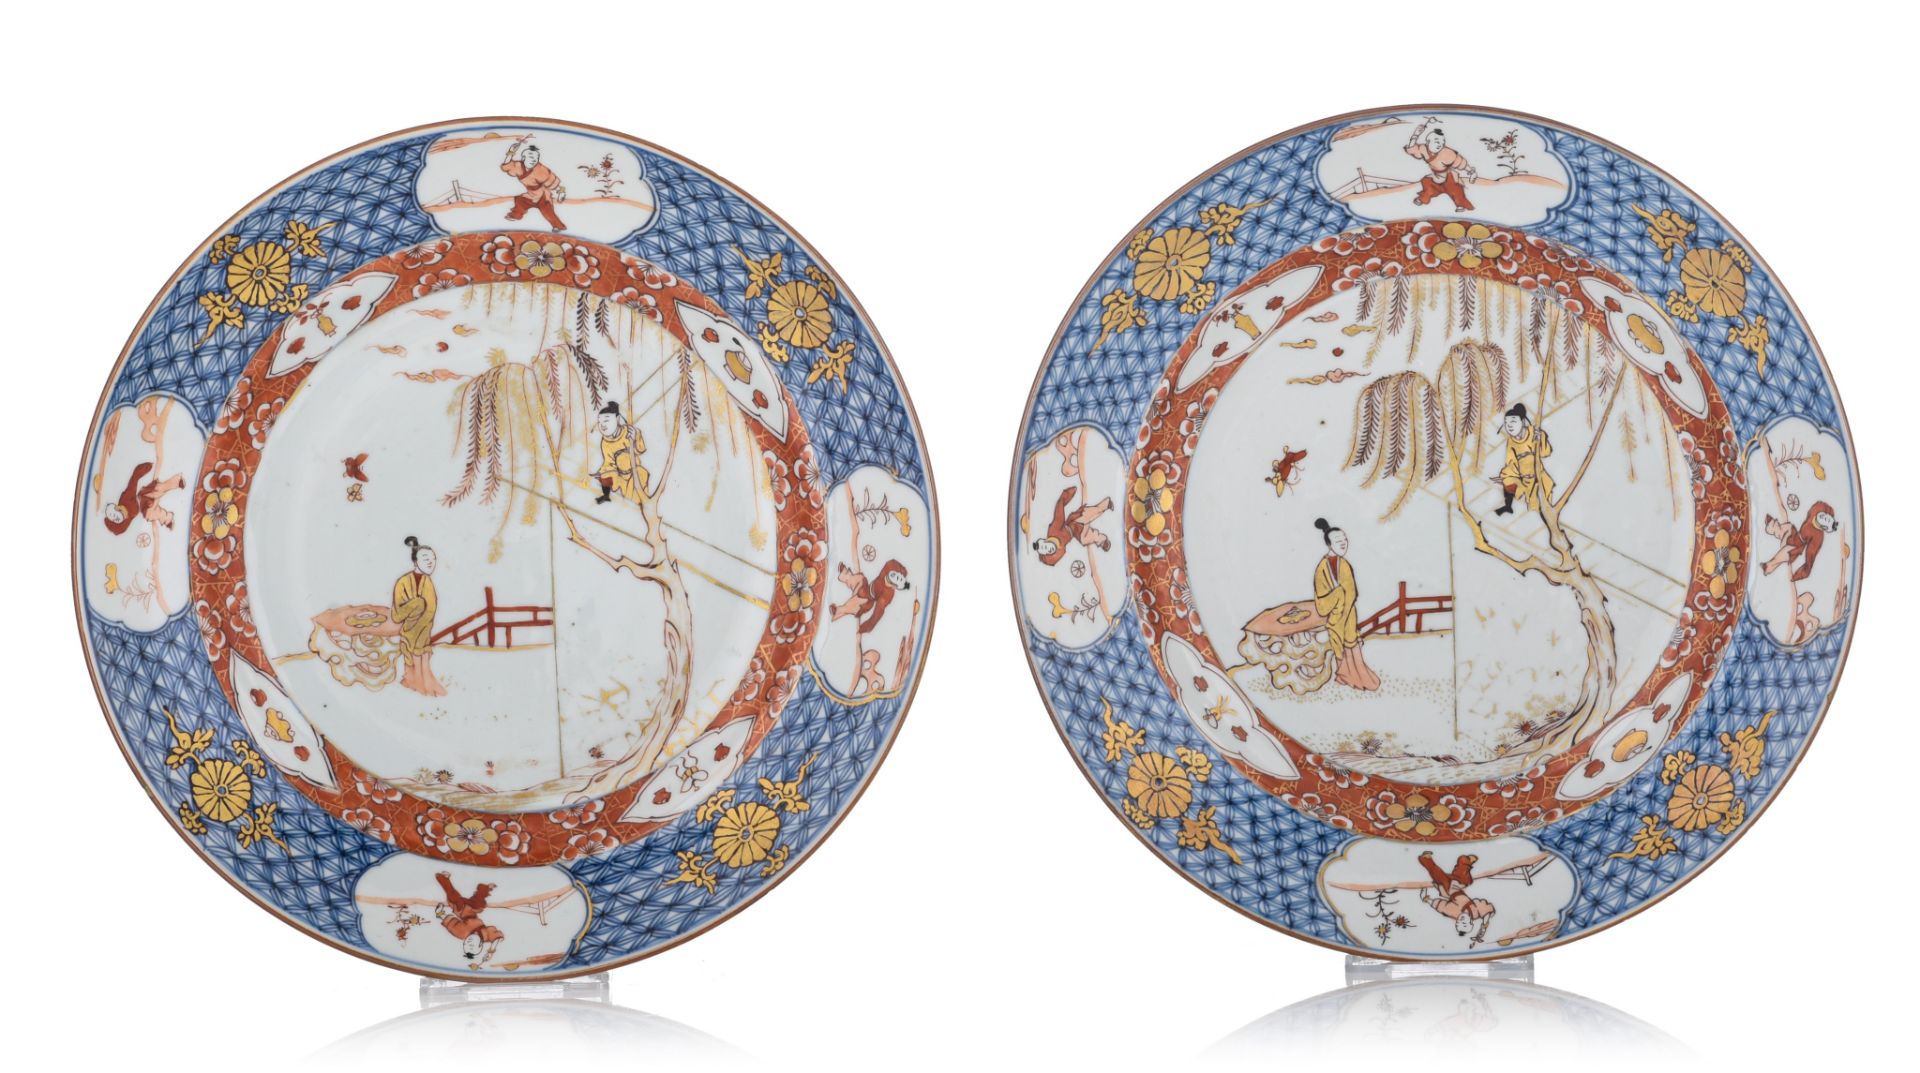 (BIDDING ONLY ON CARLOBONTE.BE) A collection of fine Chinese Imari figural export porcelain plates, - Image 2 of 10